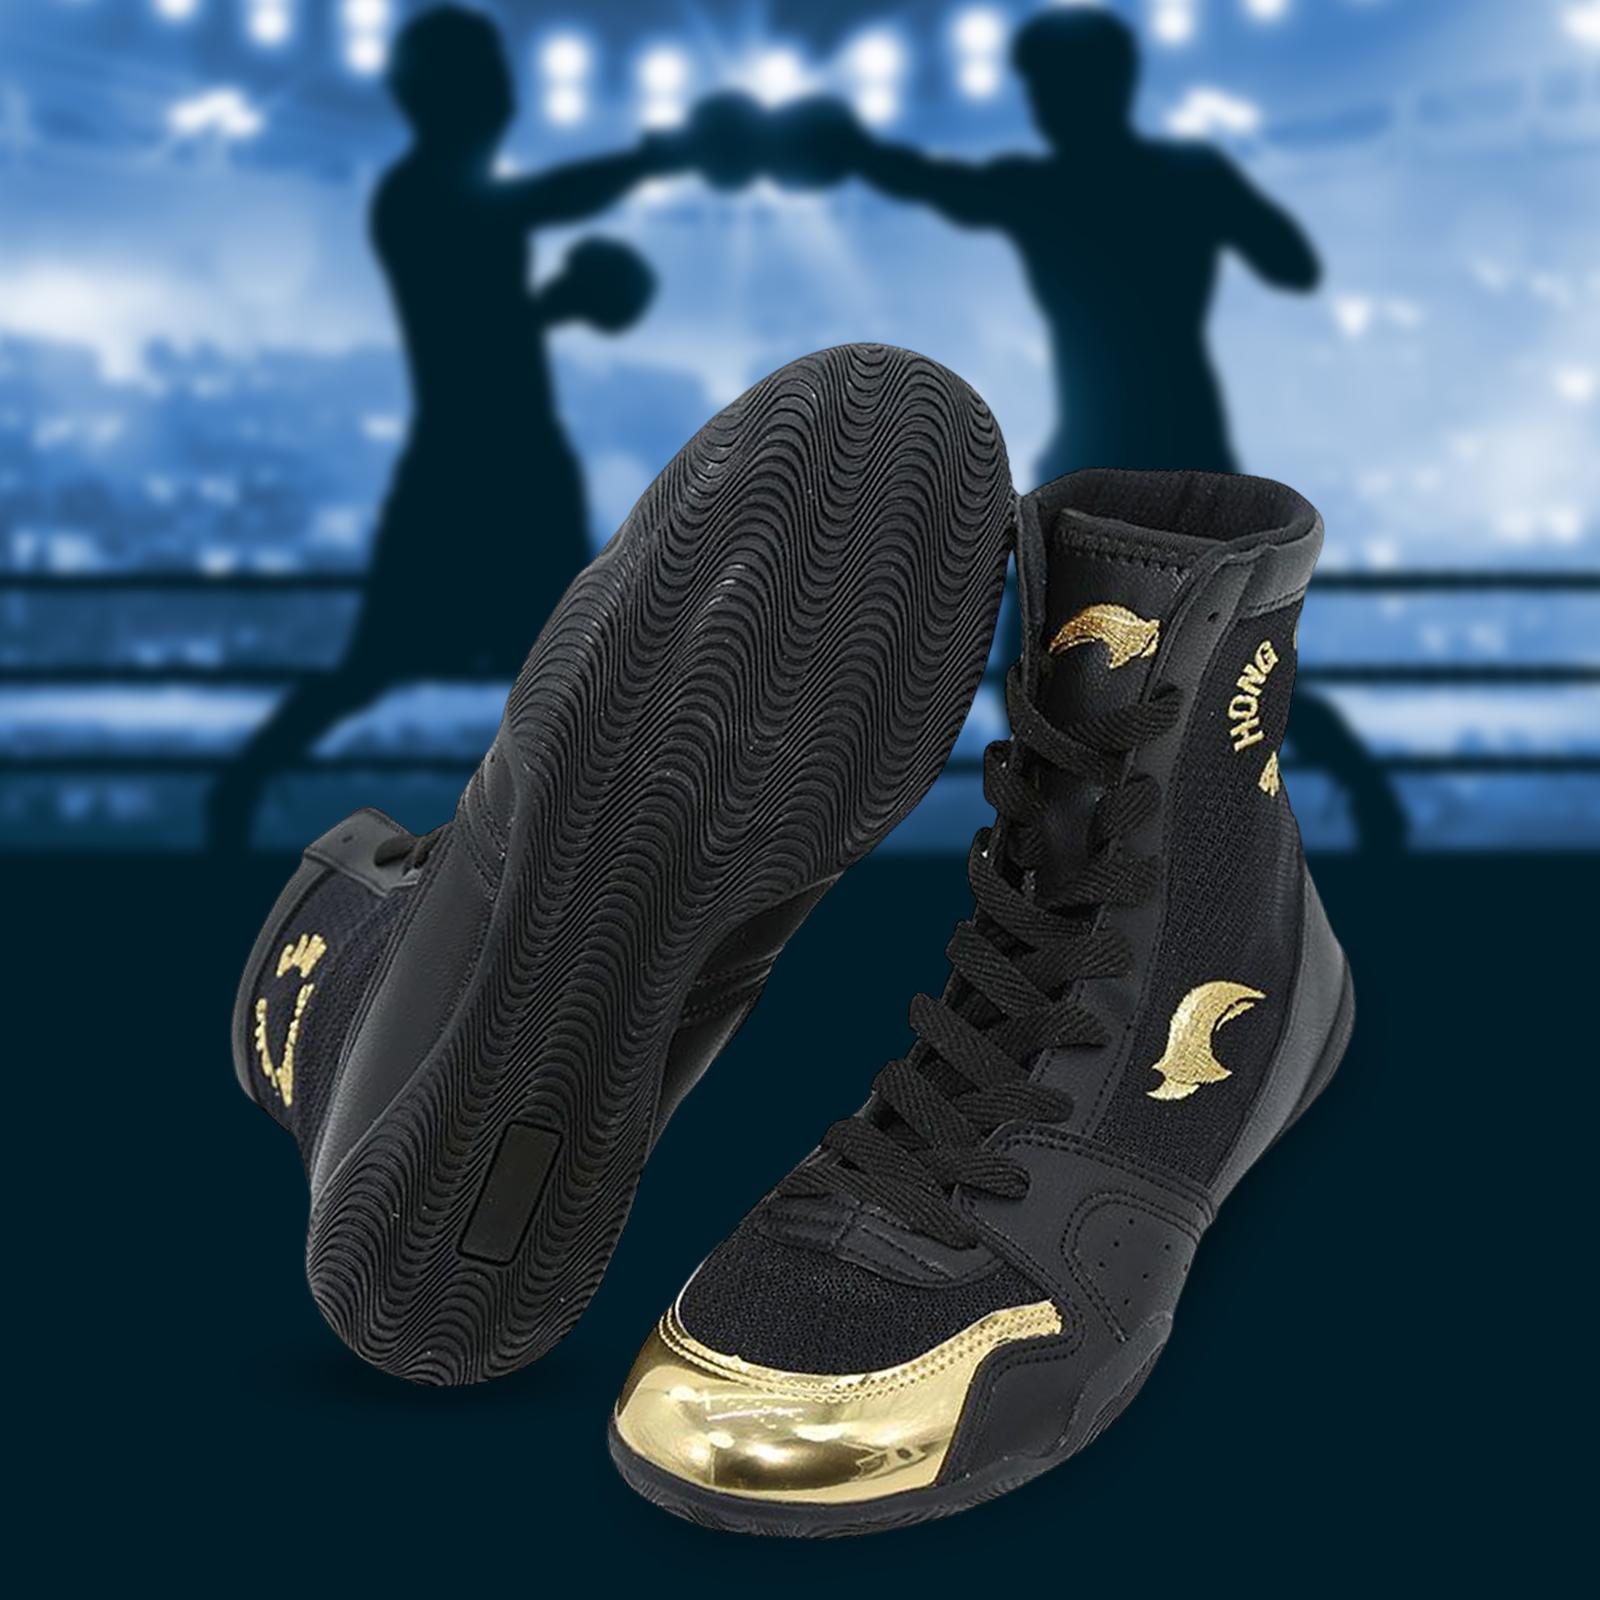 Kick Boxing Shoes Wrestling Boots Practice for Grappling Taekwondo Mma 42